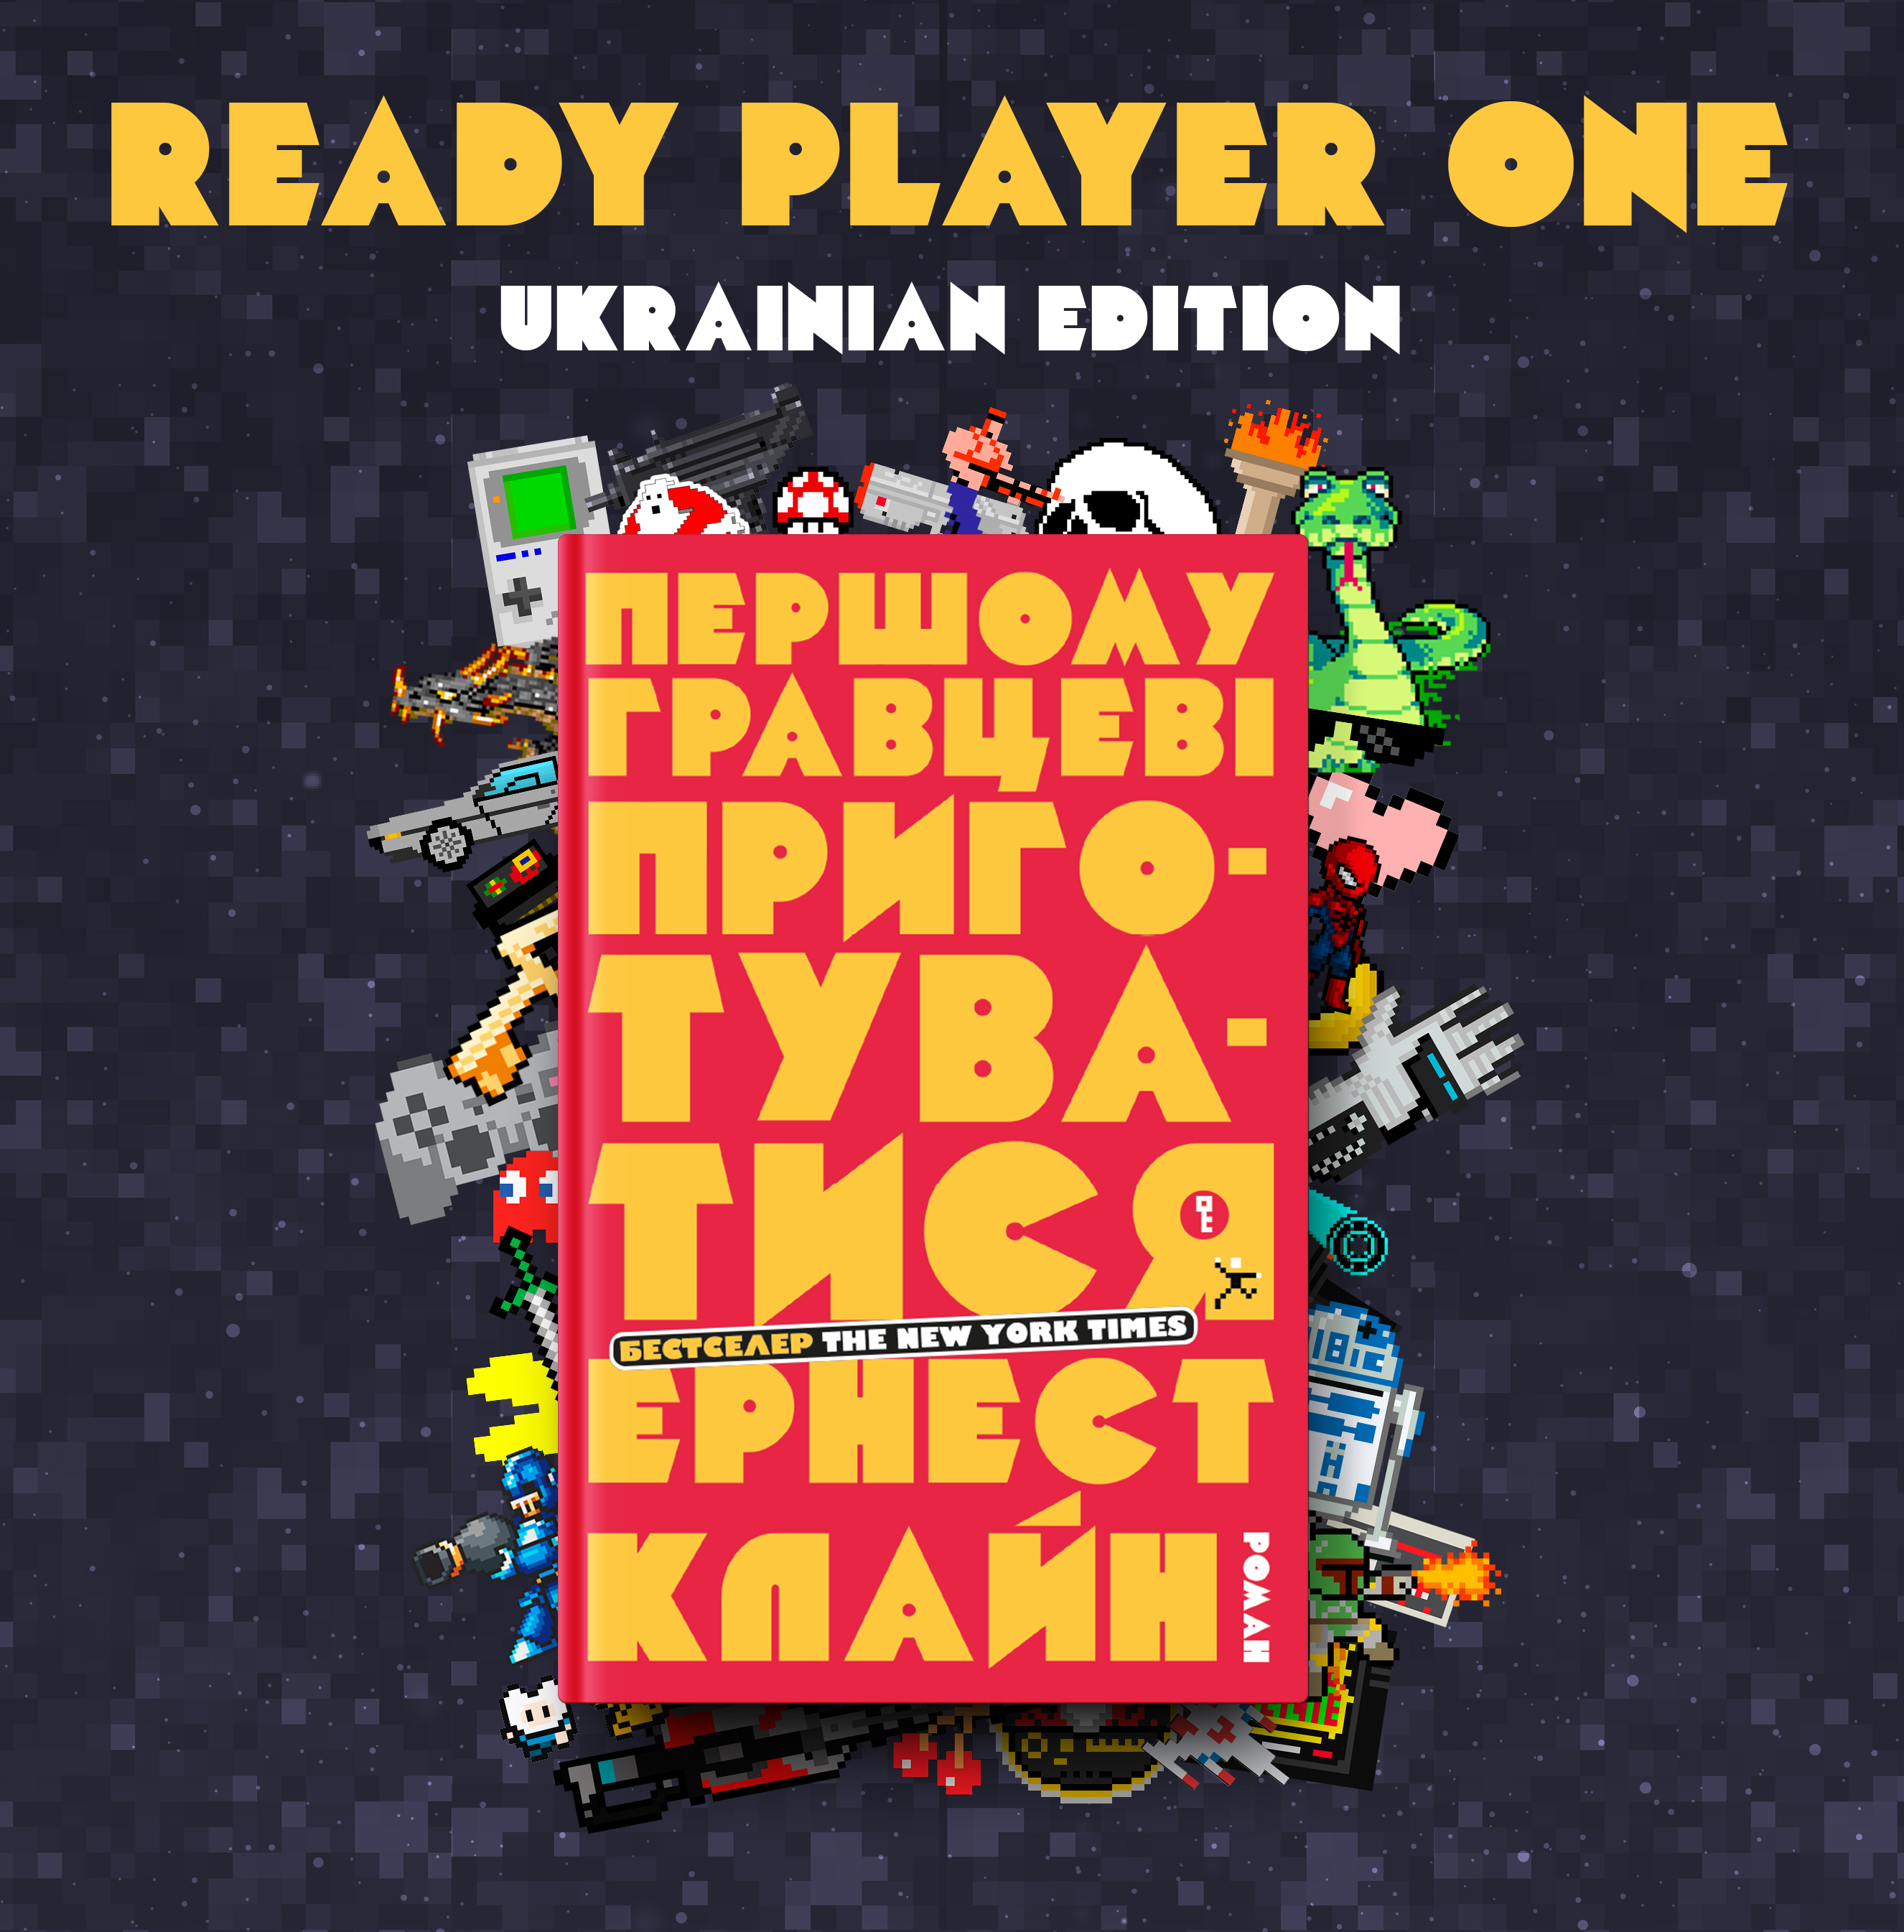 Ready Player One by Ernest Cline Printable Book Cover -  Israel